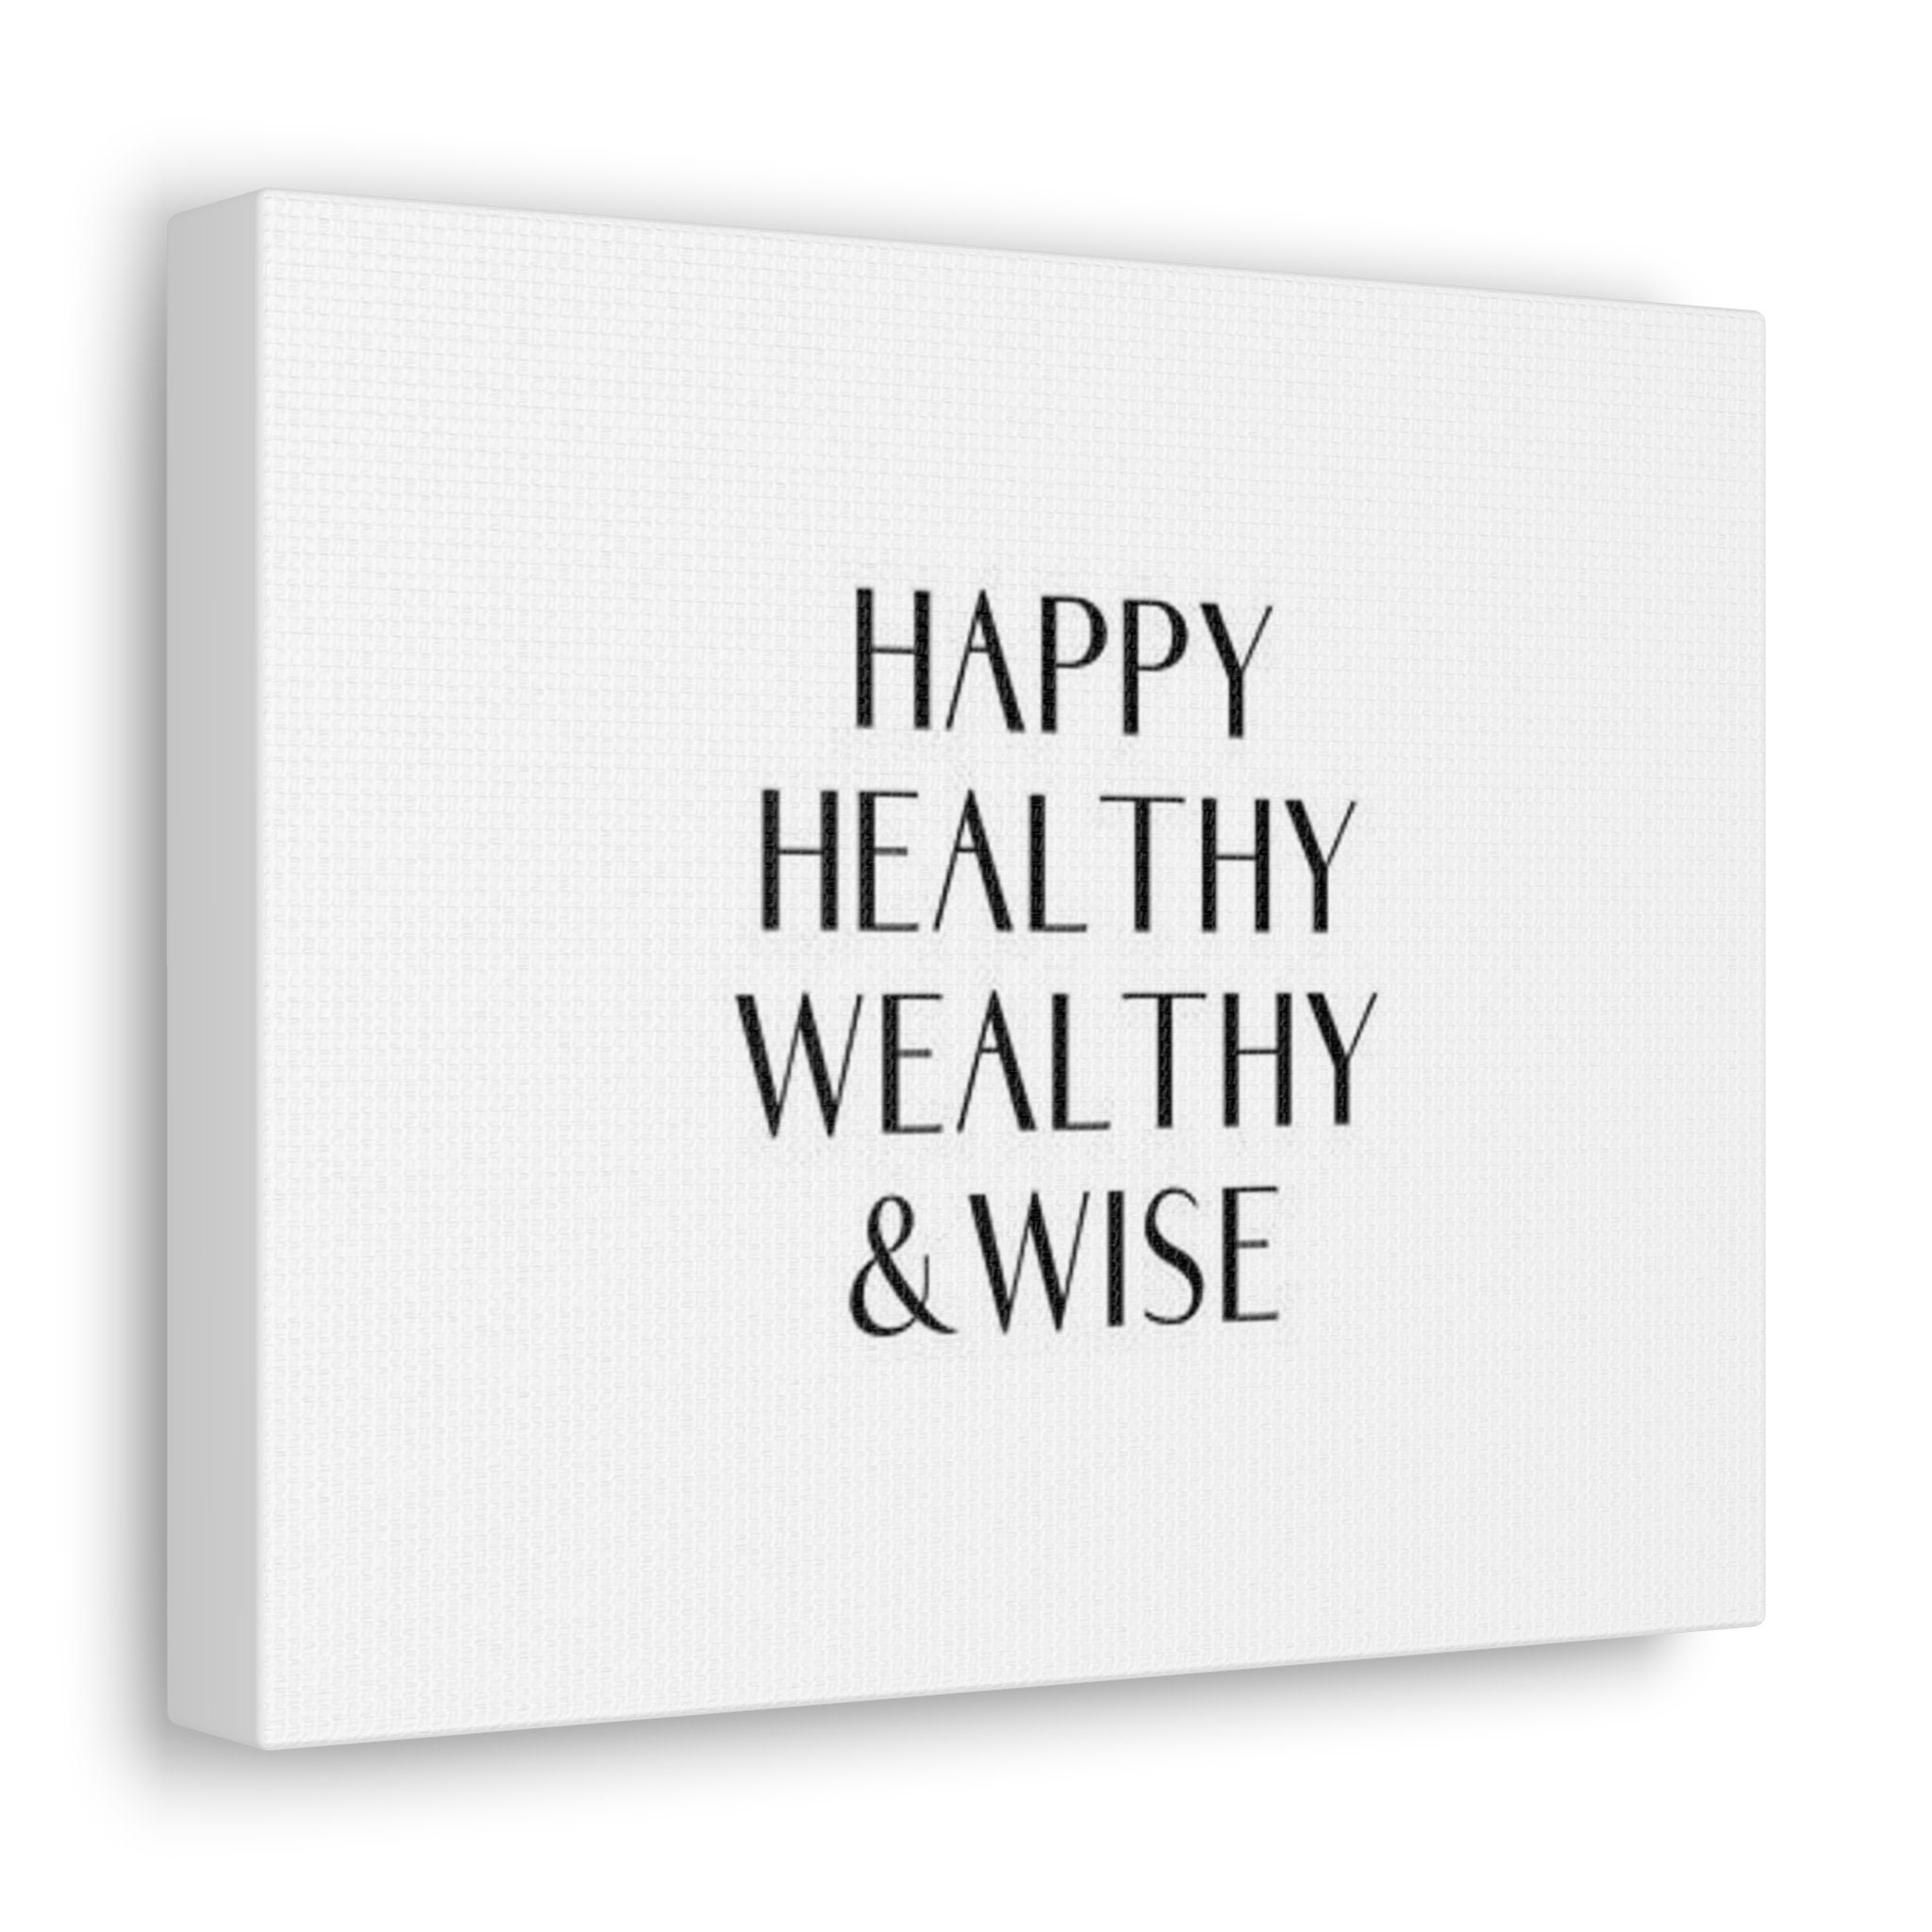 Healthy Wealthy Wise 